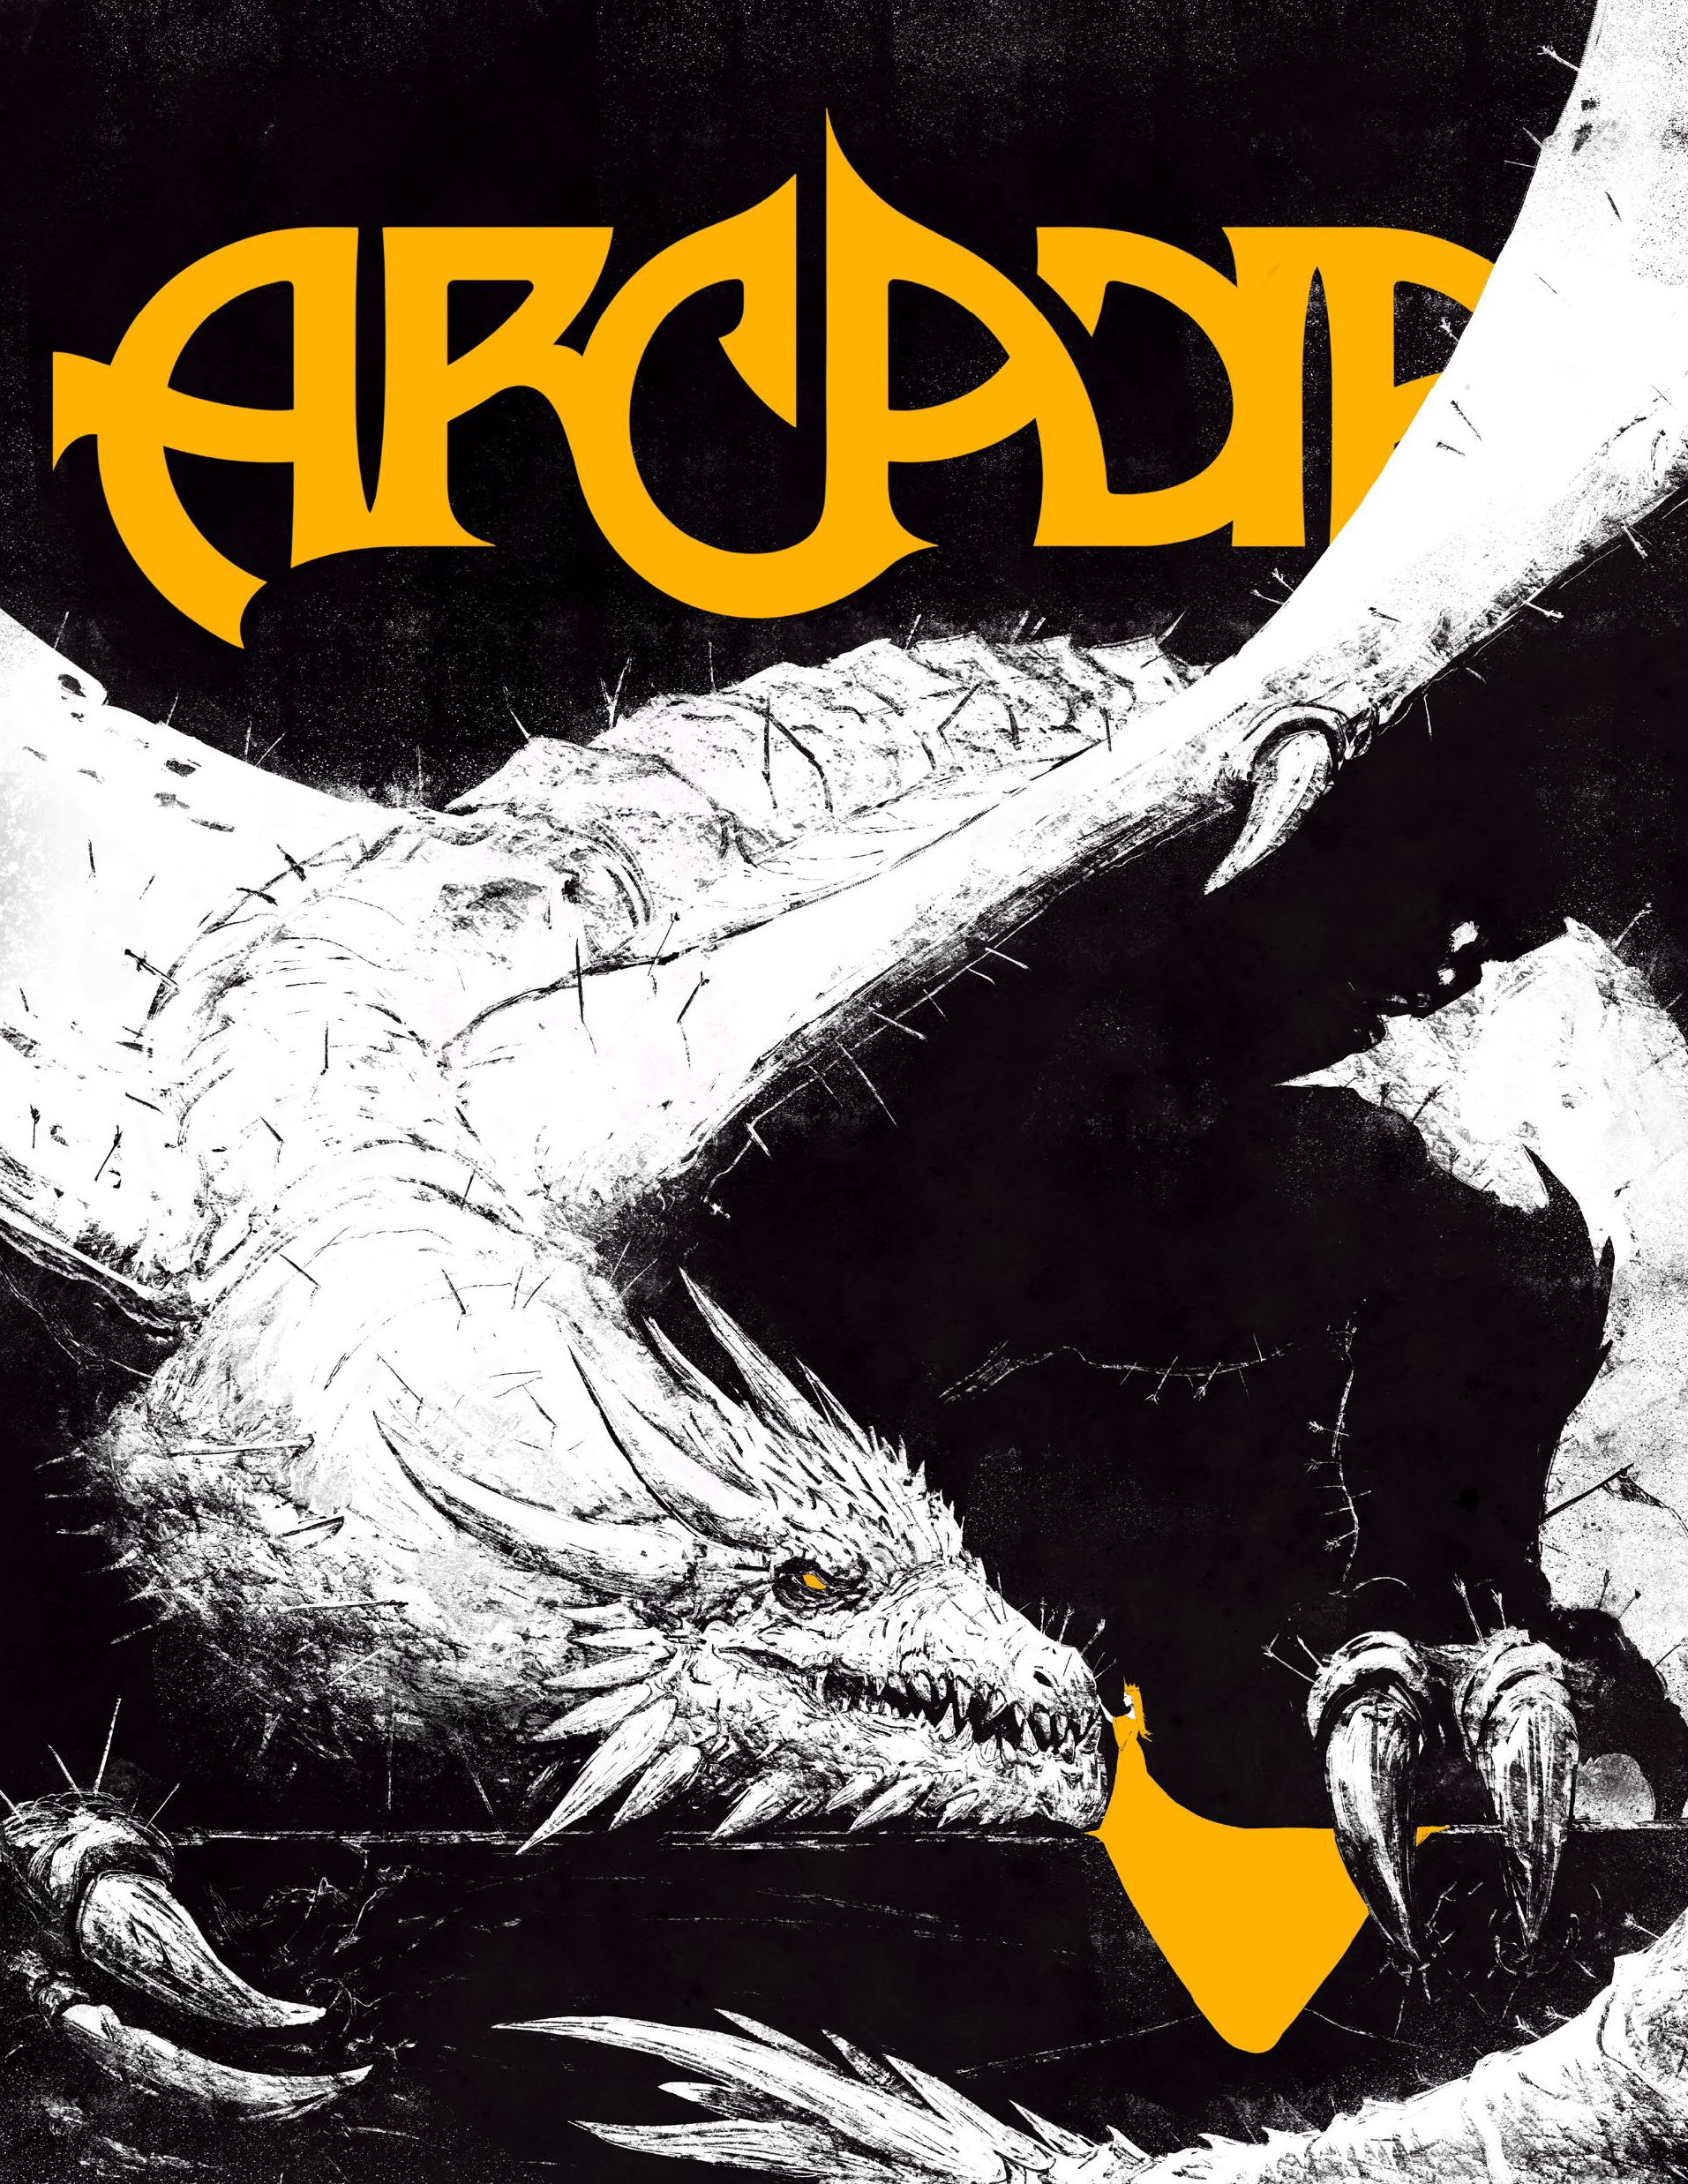 ARCADIA 13 is here! This issue contains the following three articles and has cover from Nick De Spain.